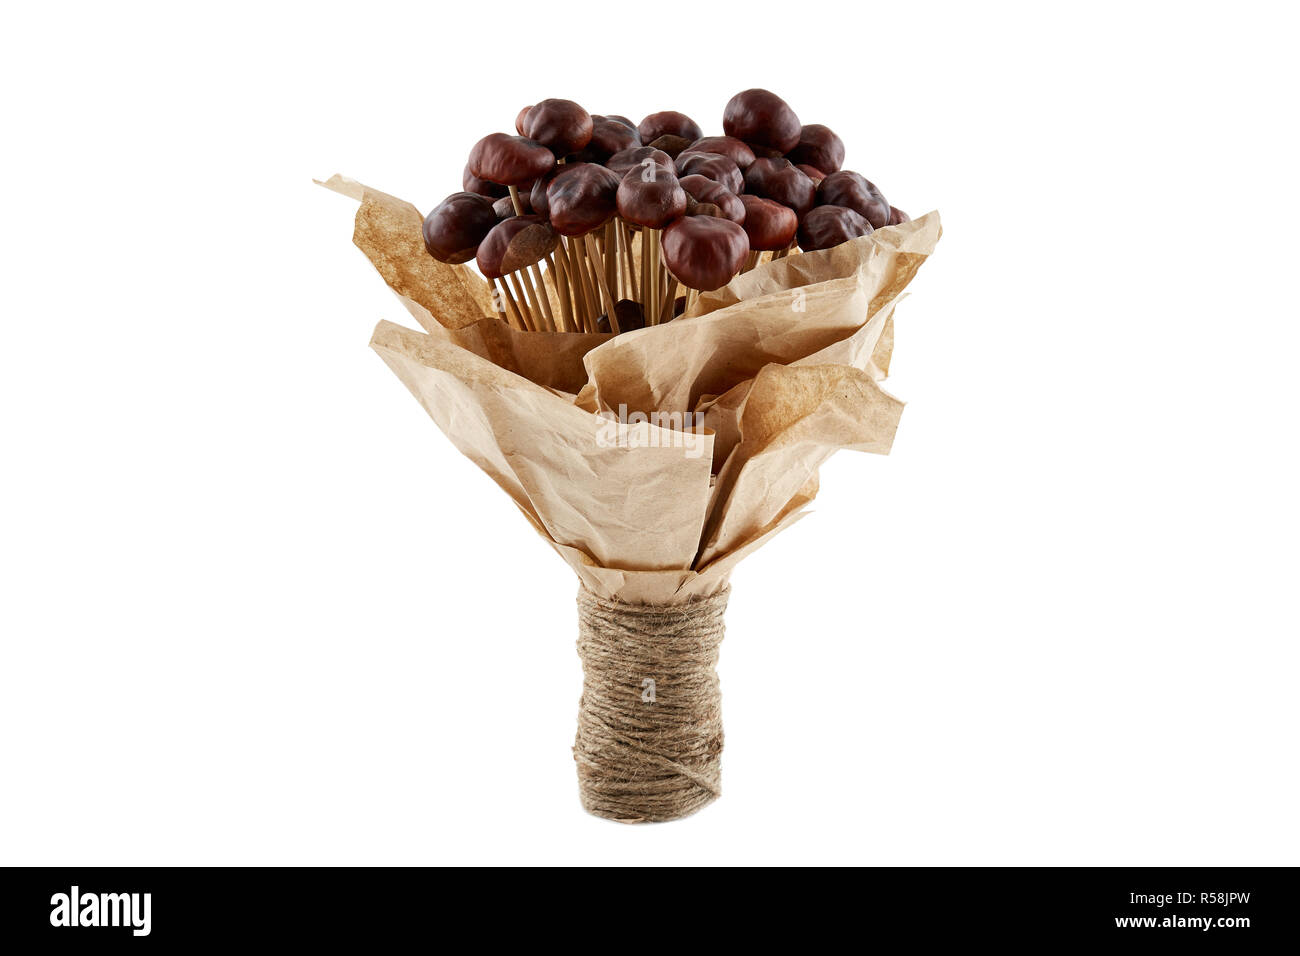 Handmade bouquet made of chestnuts in craft paper tied up with twine. Isolated. Stock Photo